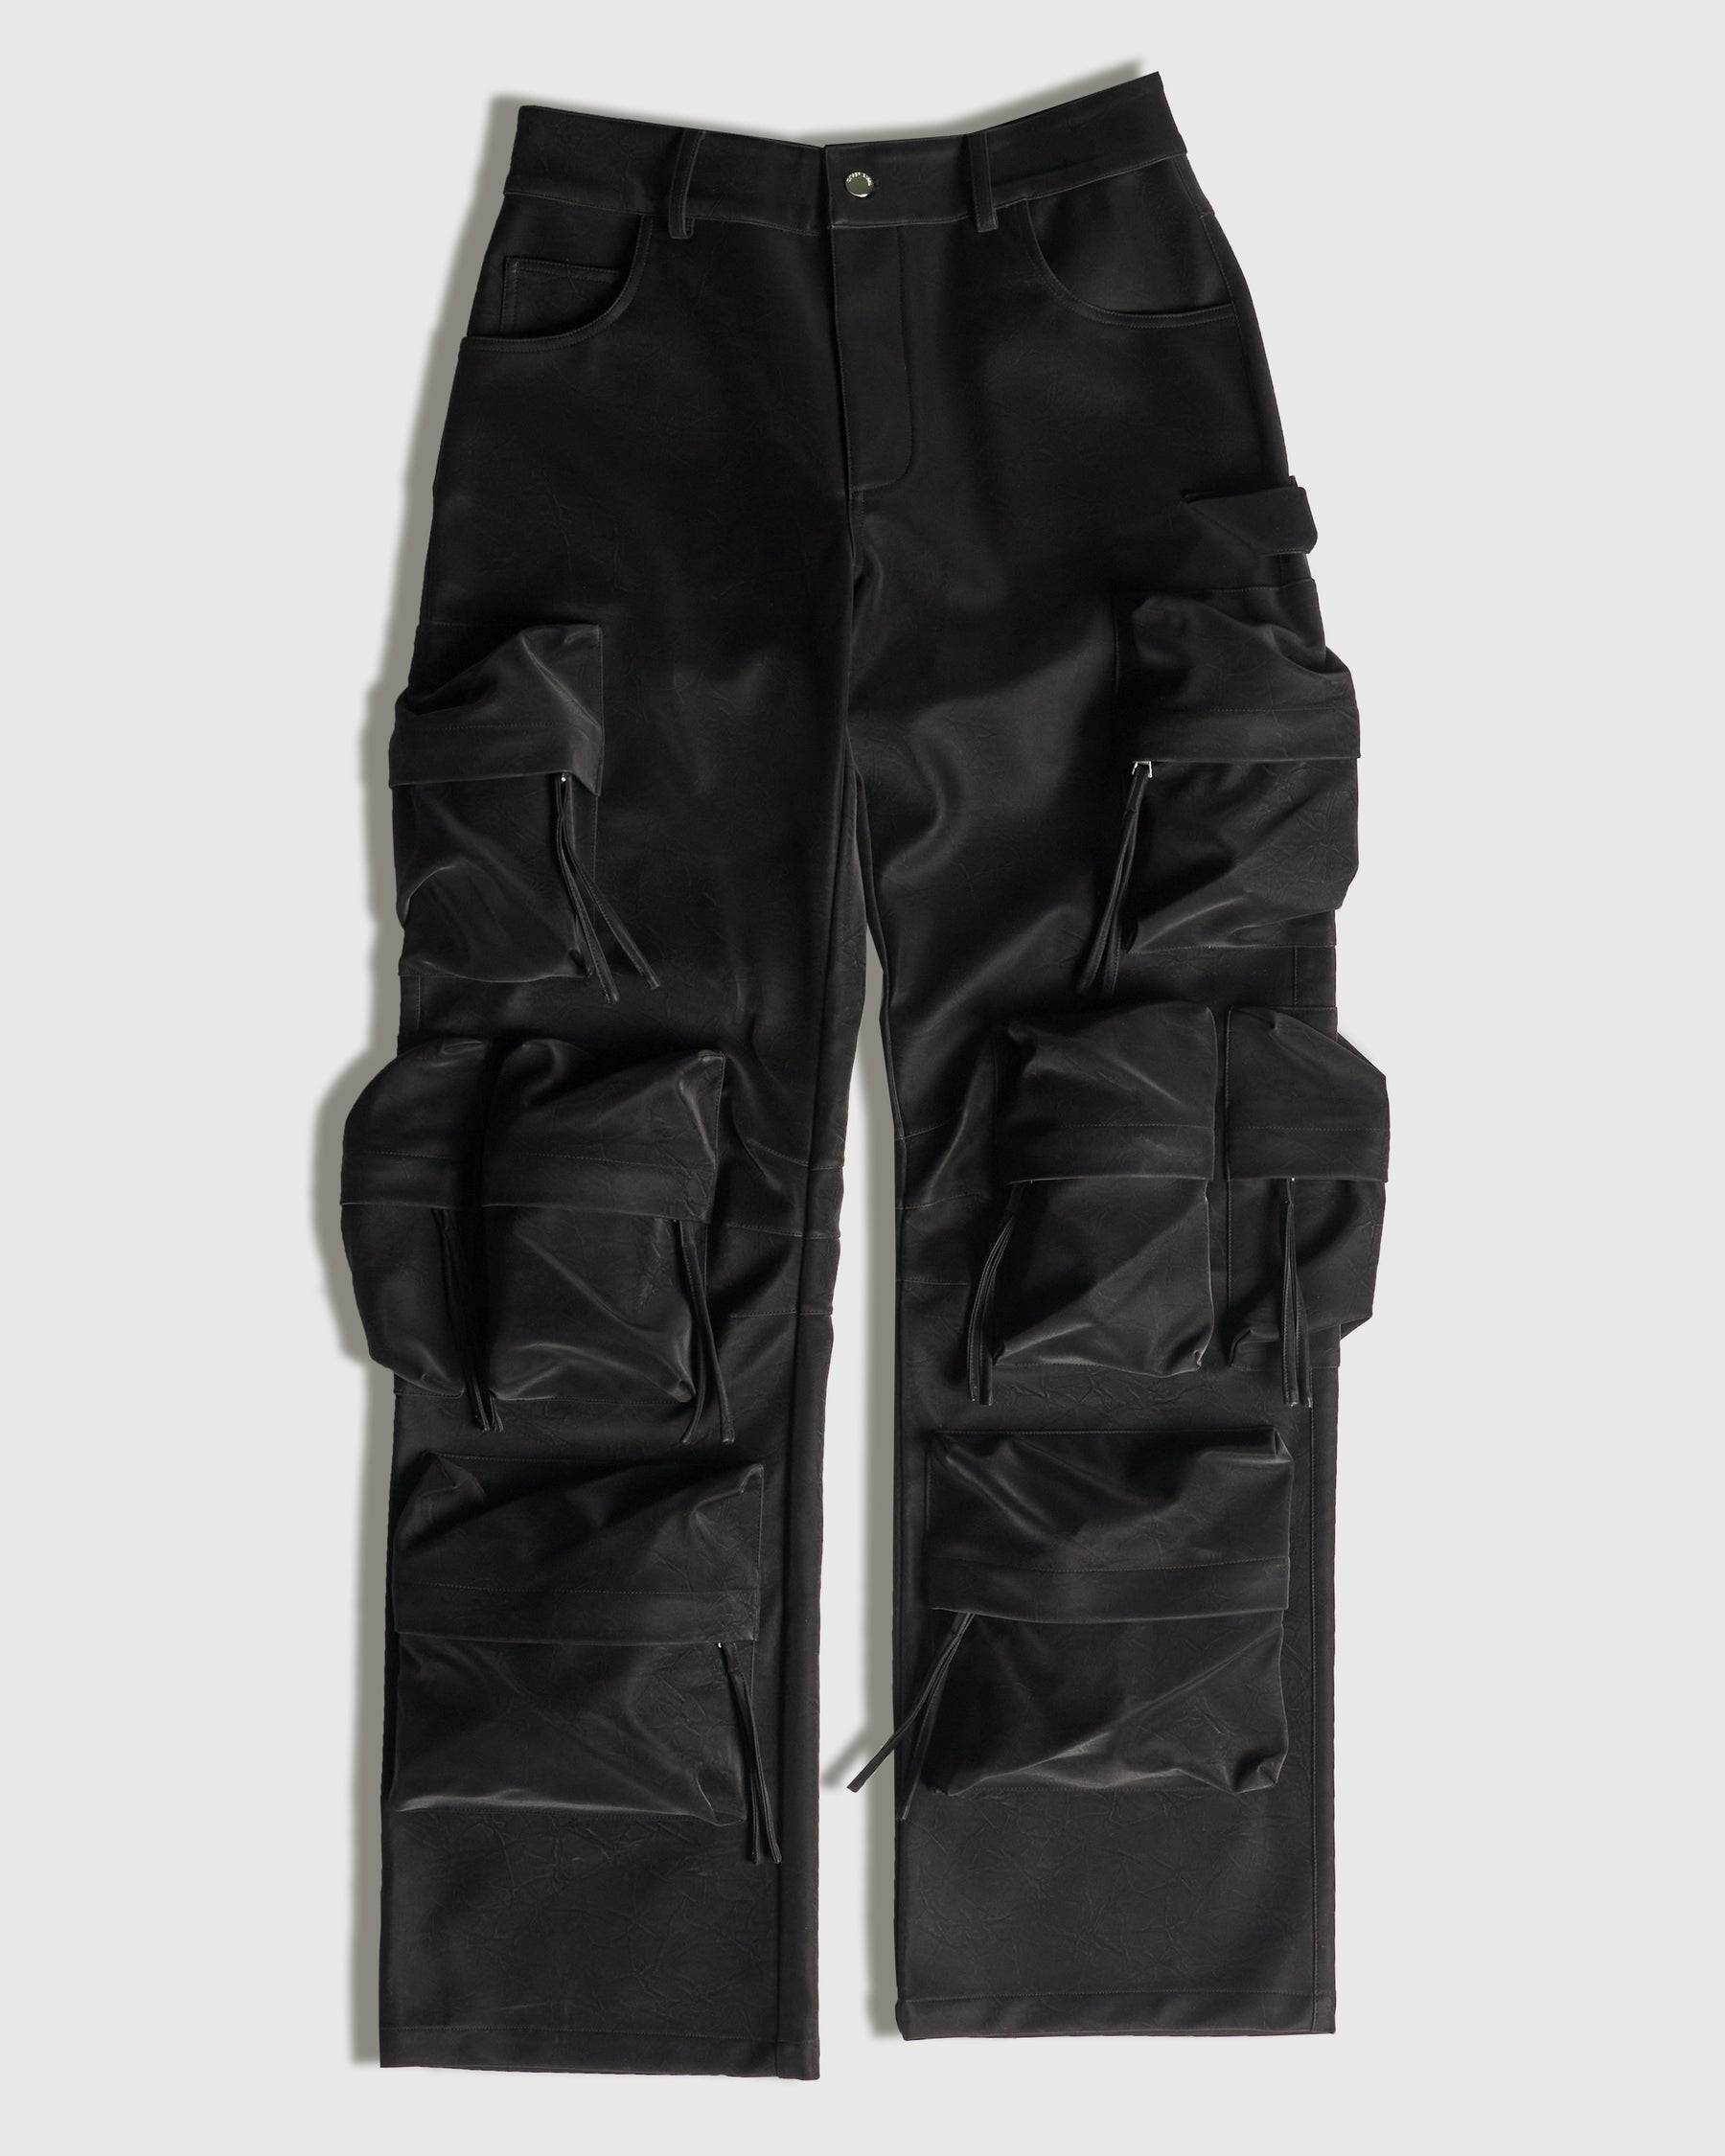 MIDNIGHT "LEATHER" KCARGO PANT